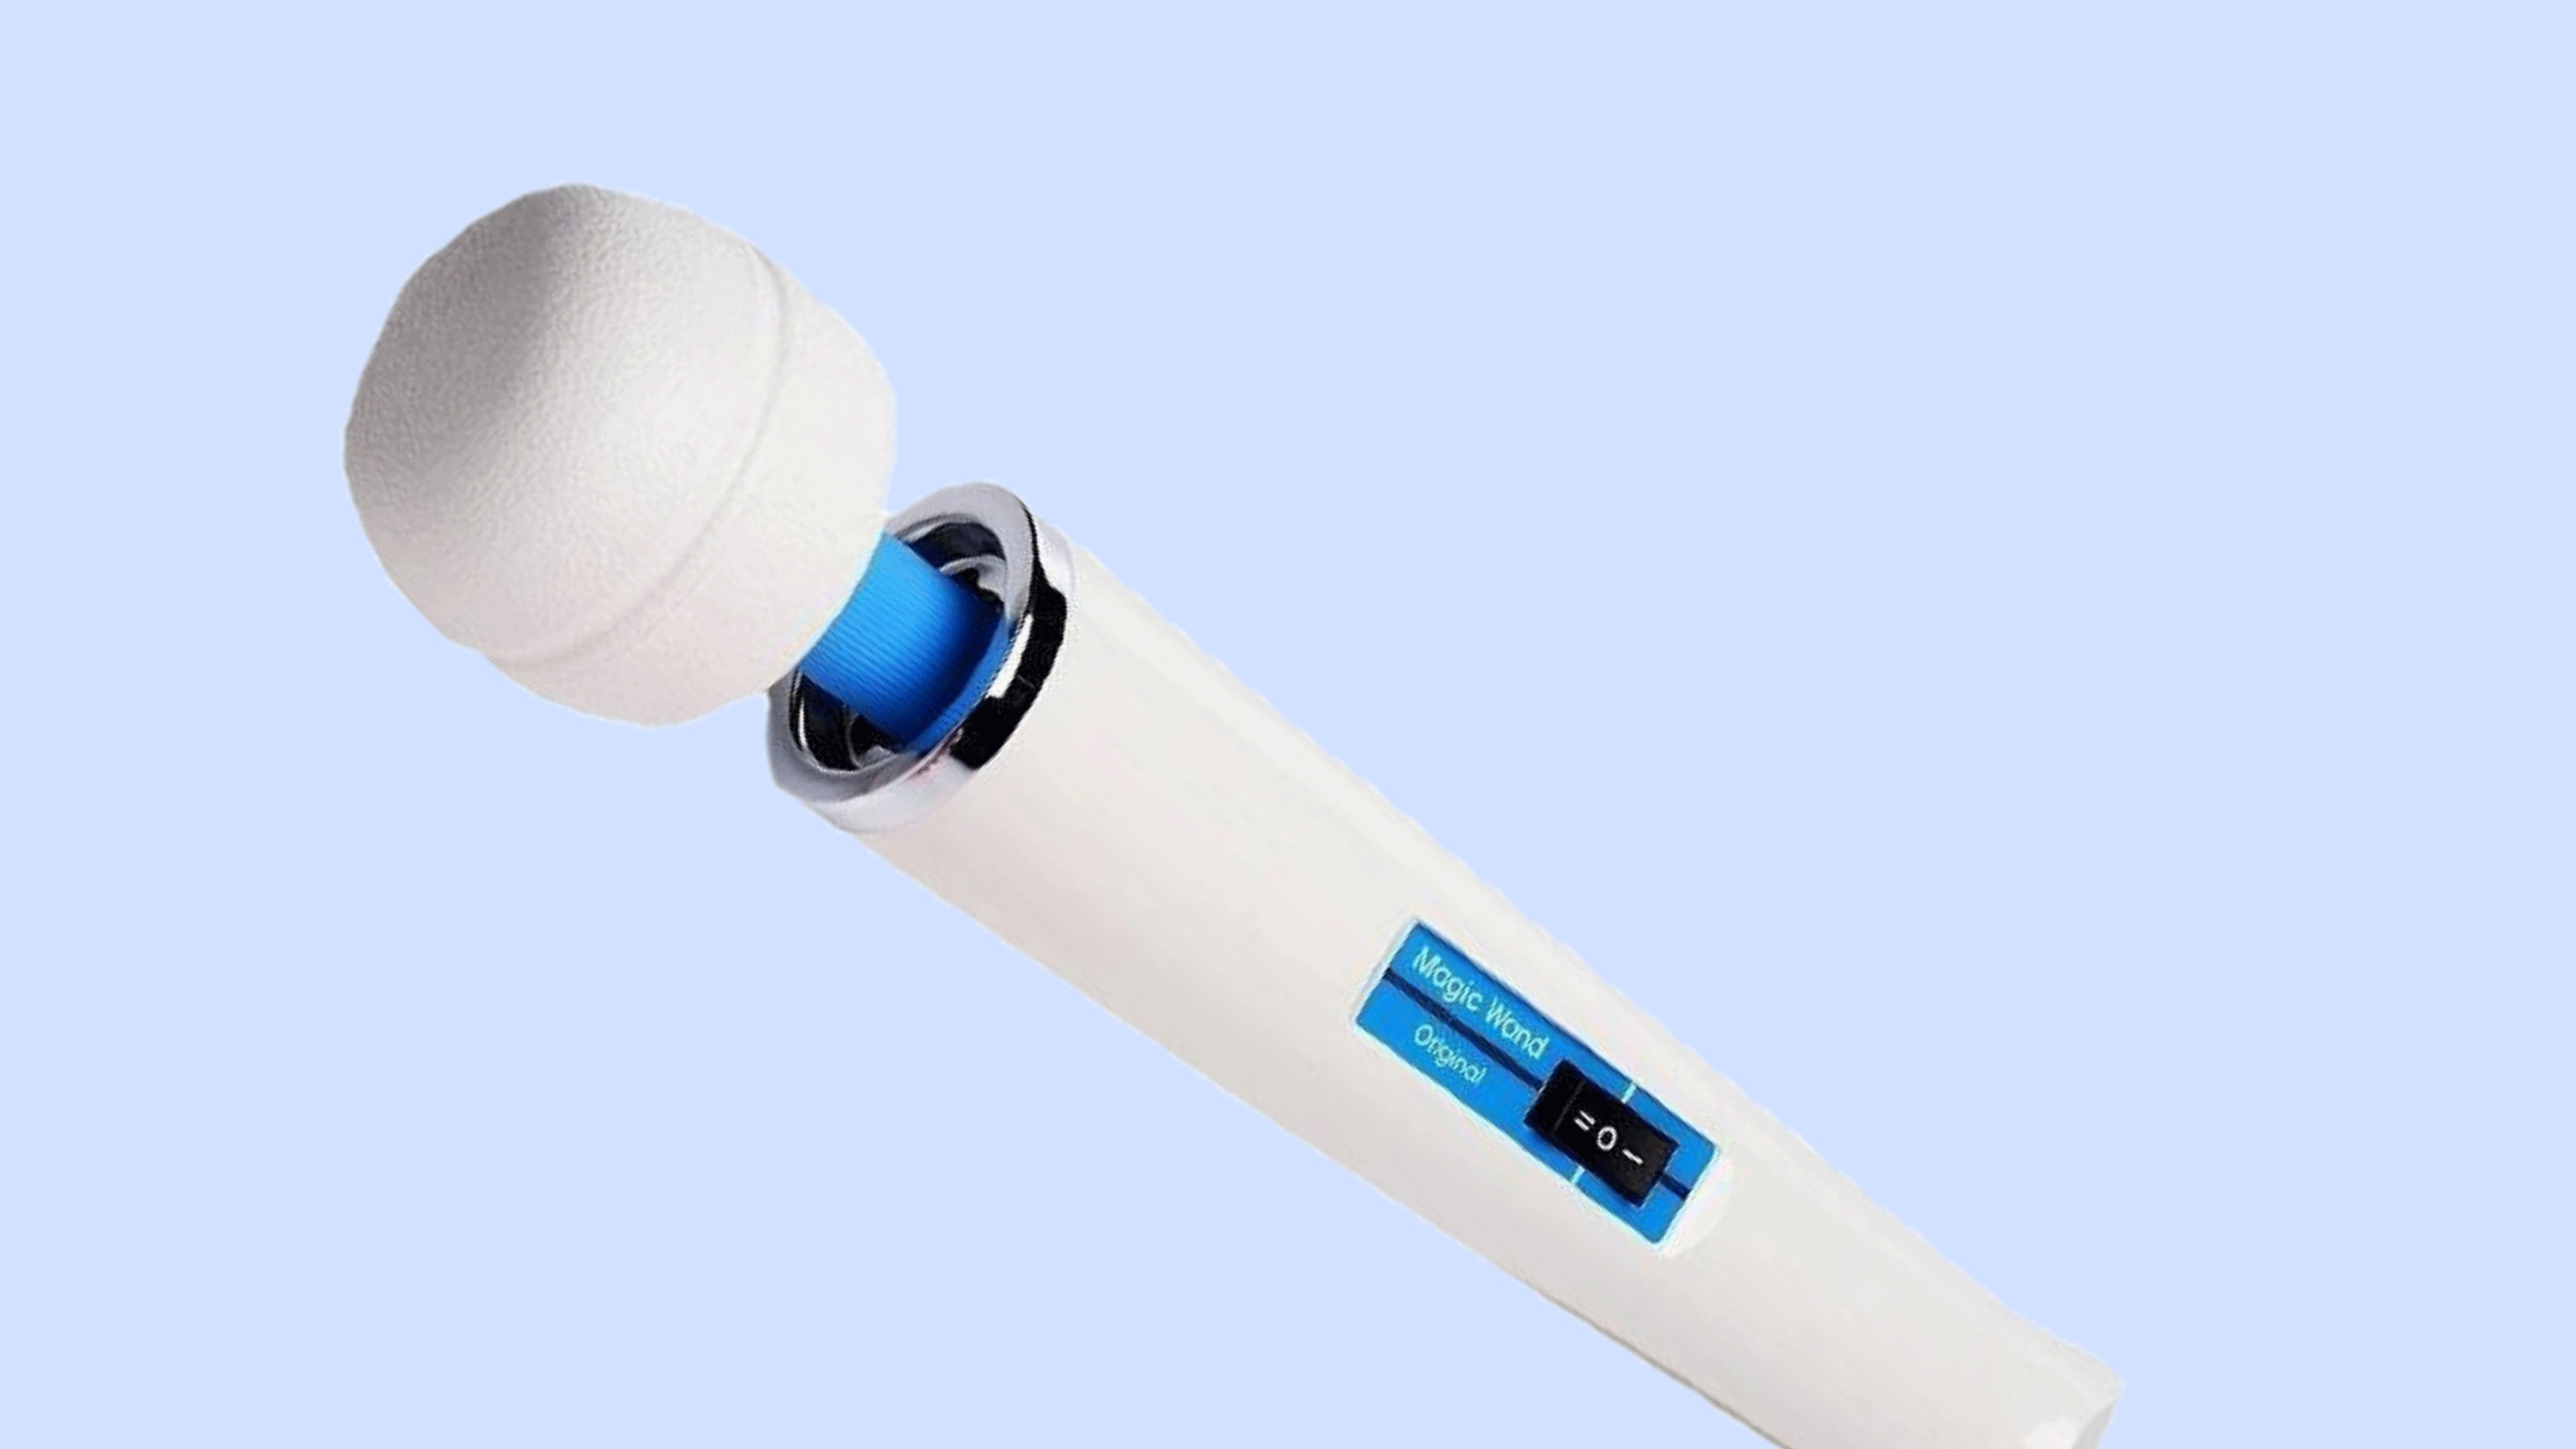 Hitachi magic wand multiple orgasms Very hot Adult free archive.